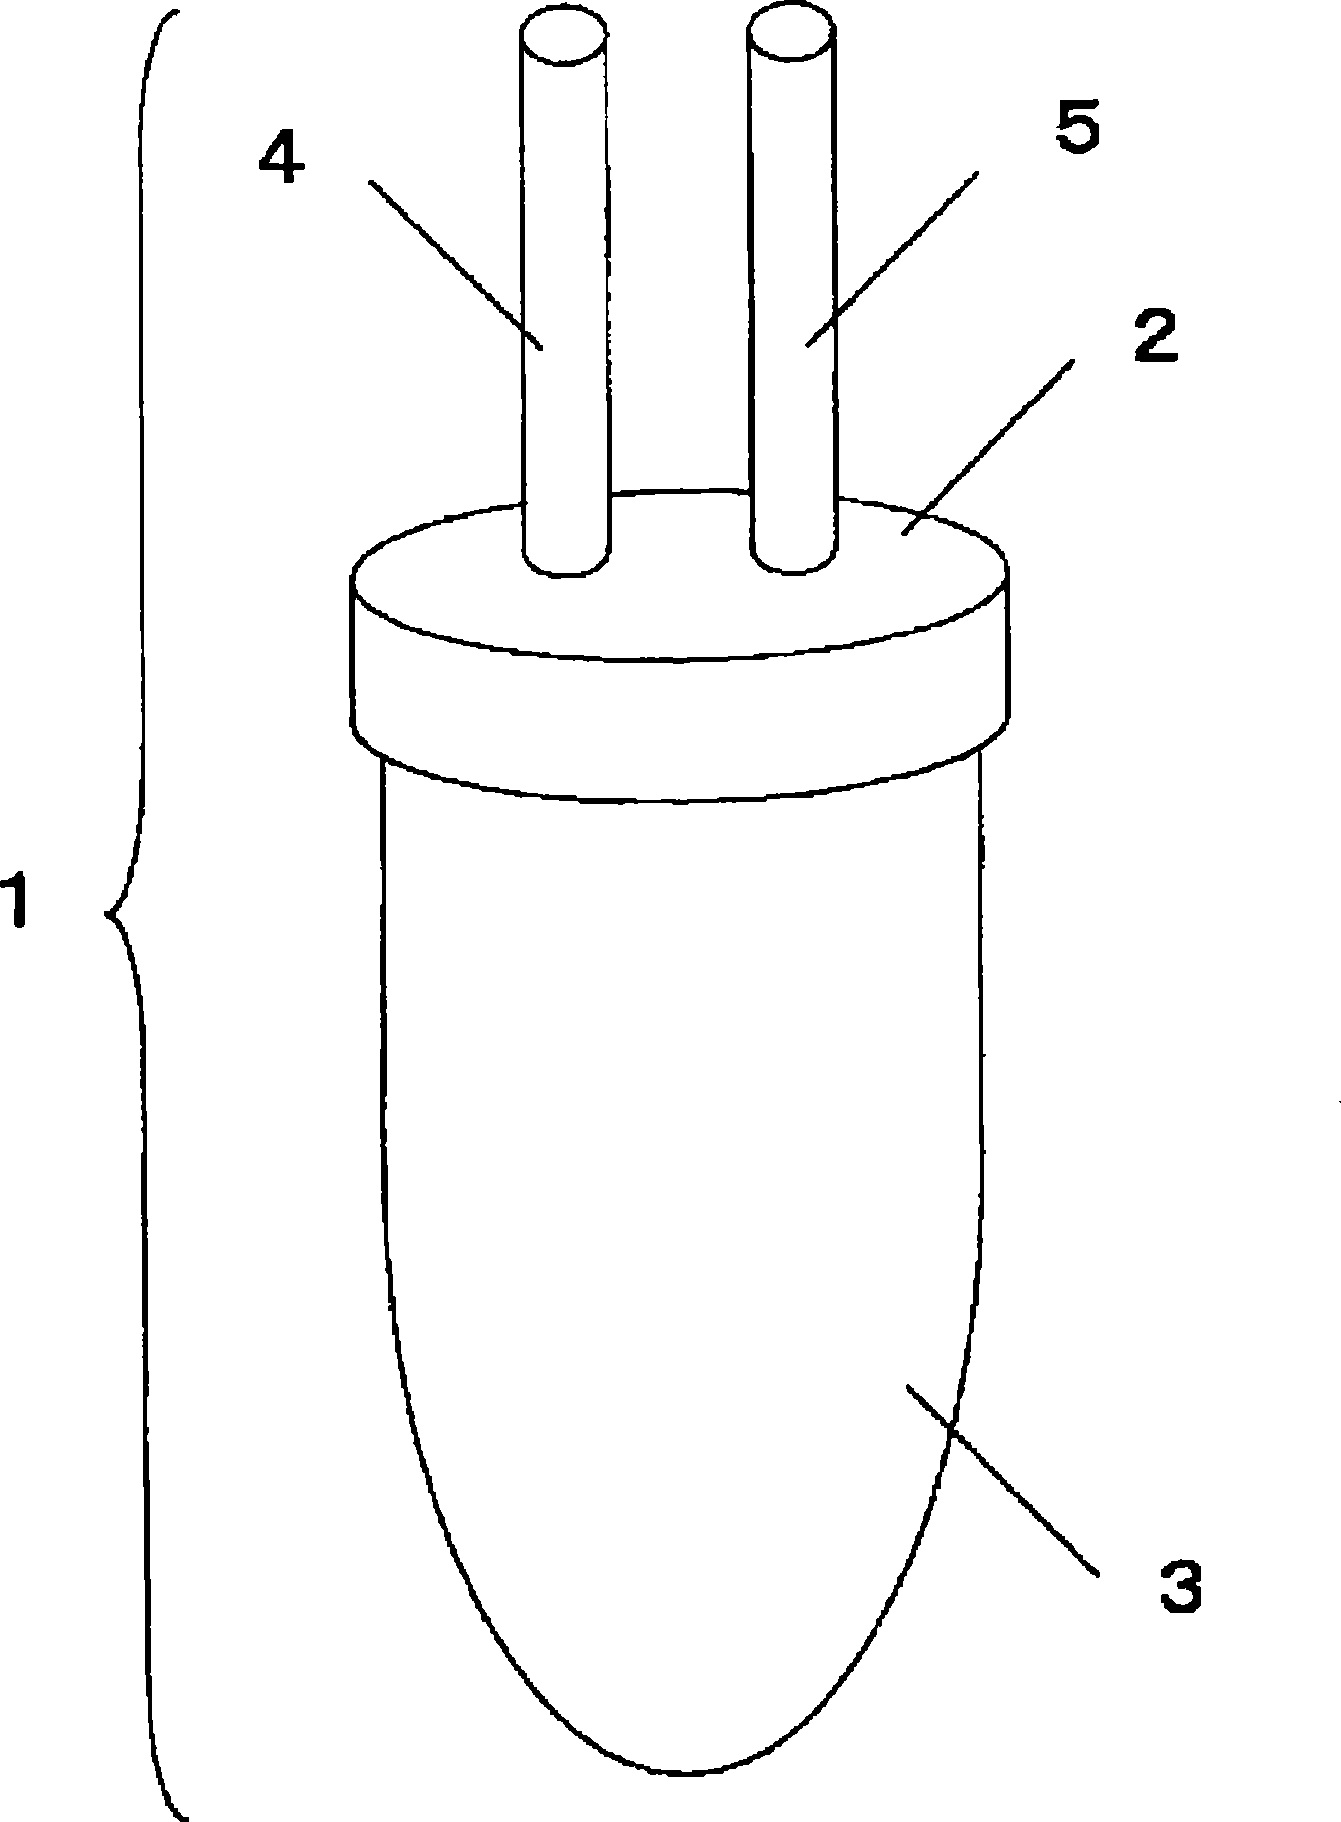 Method for detecting disease-related marker using gastric mucosal lavage fluid